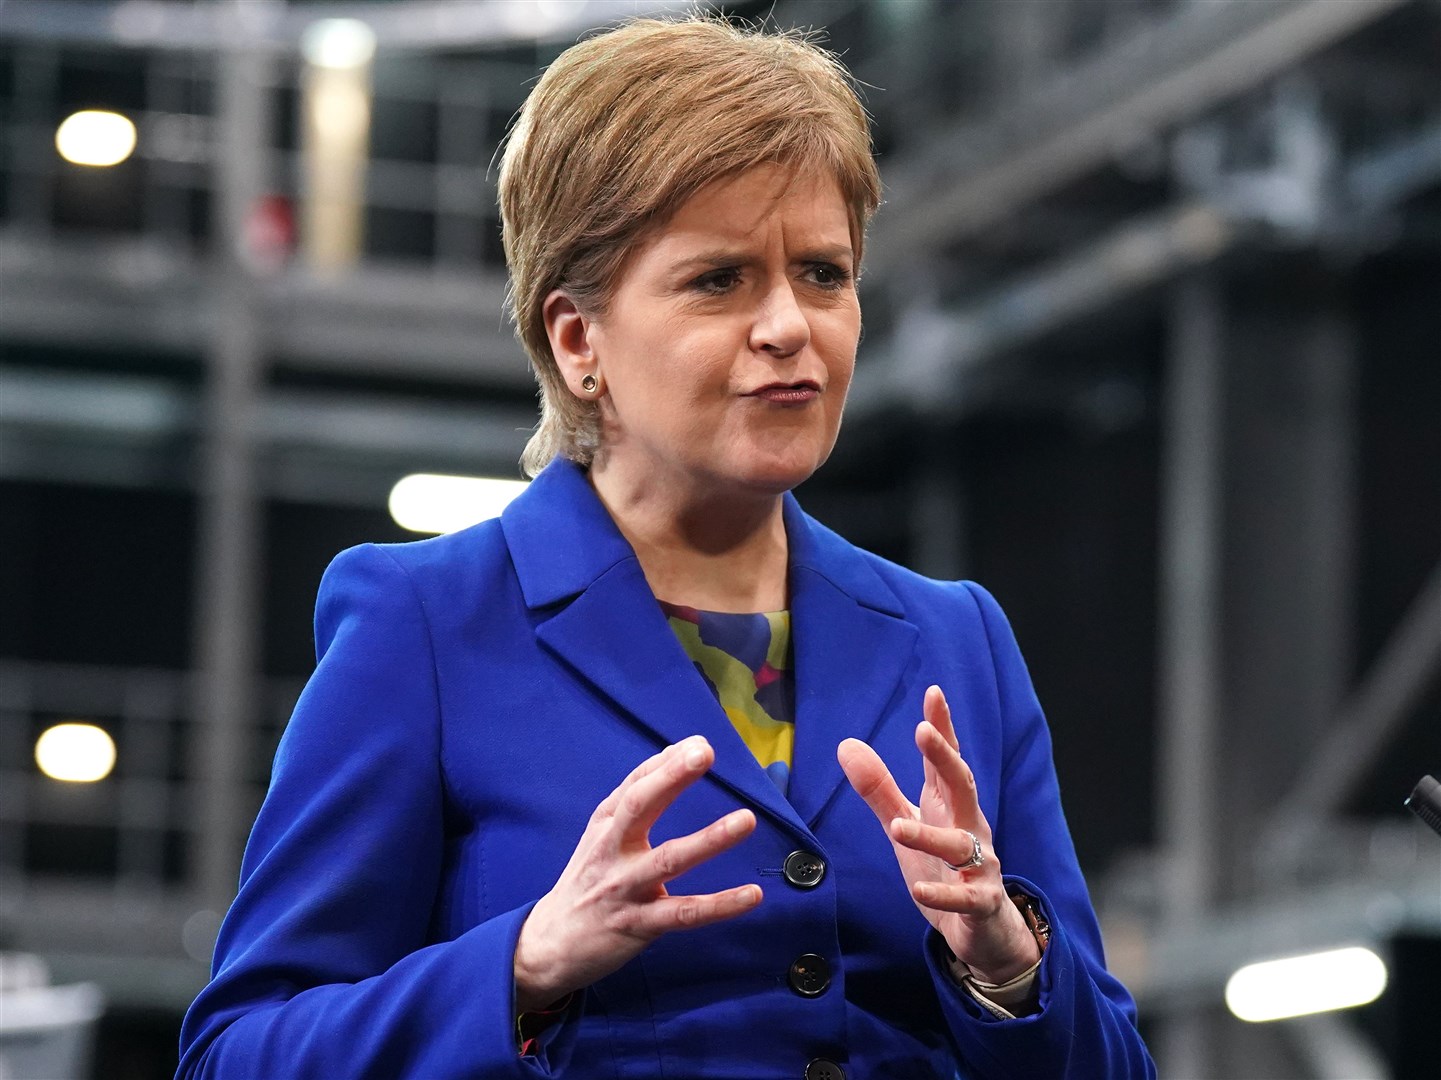 The poll shows First Minister Nicola Sturgeon’s personal approval rating dropped to a net of -4% (Andrew Milligan/PA)